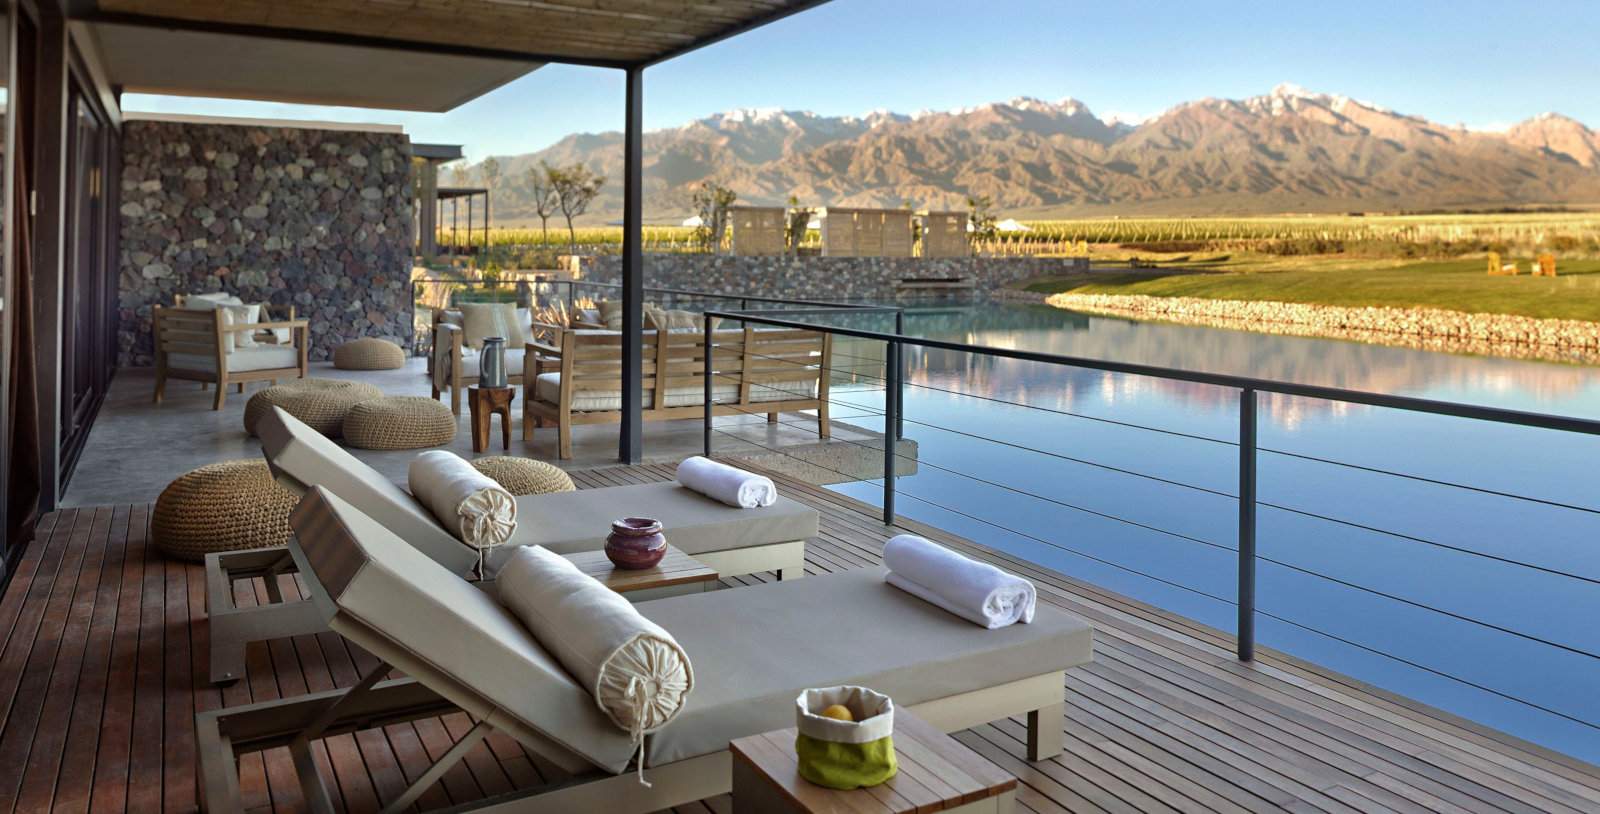 The Vines one of the most luxurious gay hotels in Mendoza